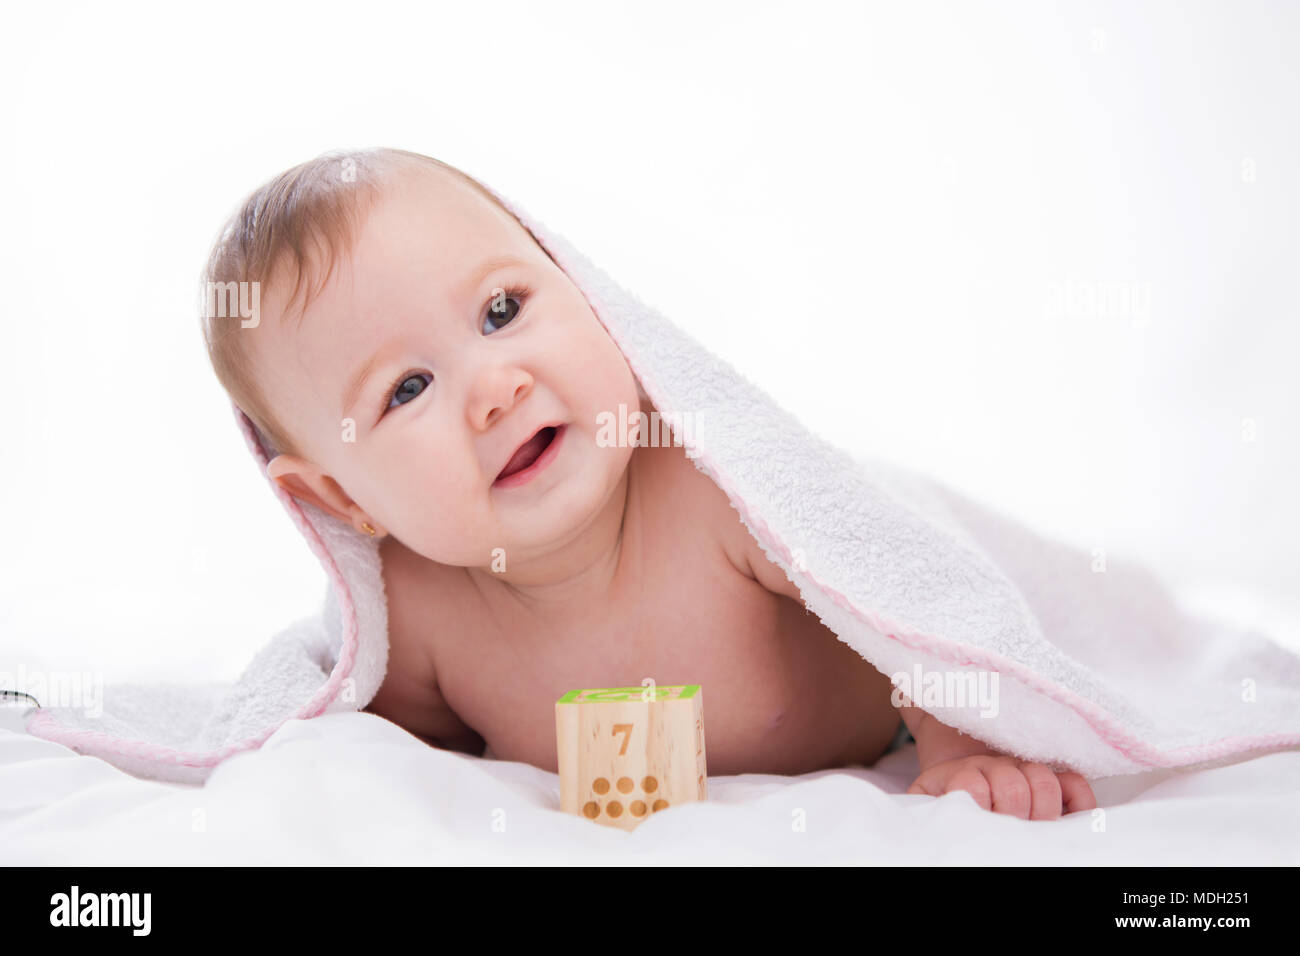 Adorable petit baby girl smiling on white background Adorable little baby girl smiling on white background Banque D'Images